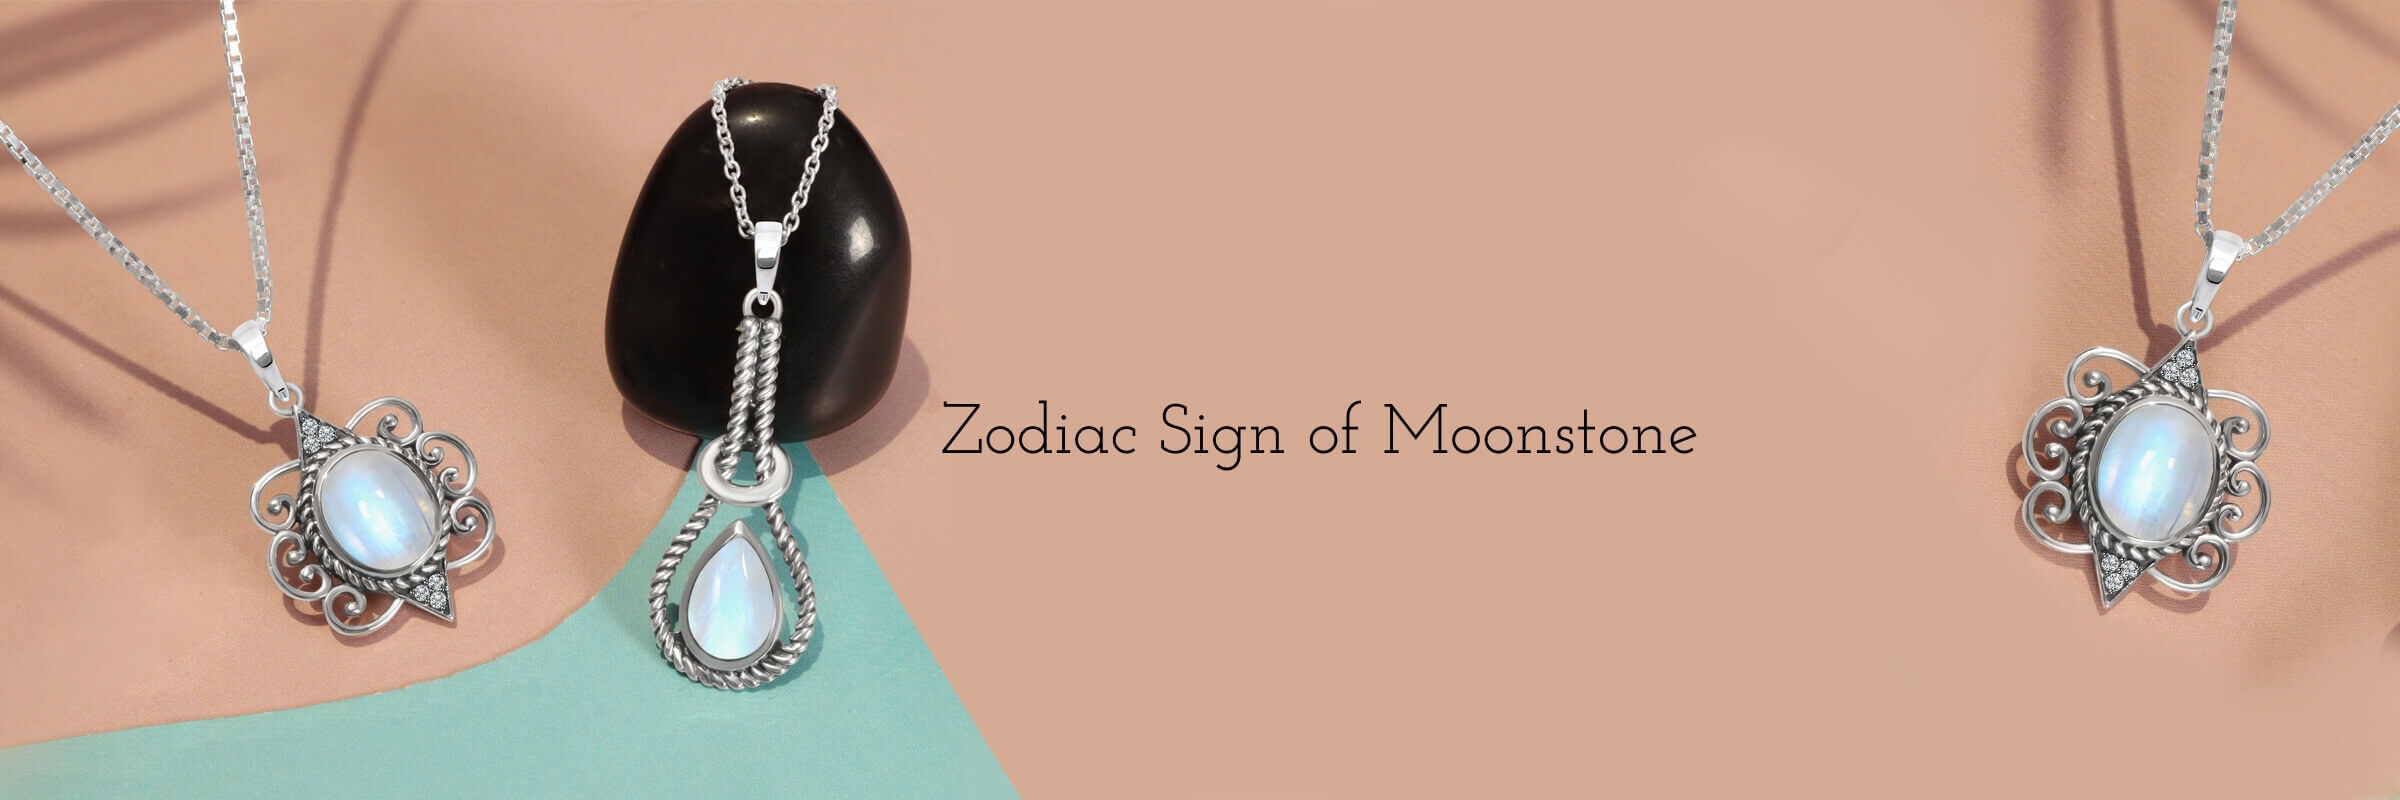 Zodiac sign associated to Moonstone